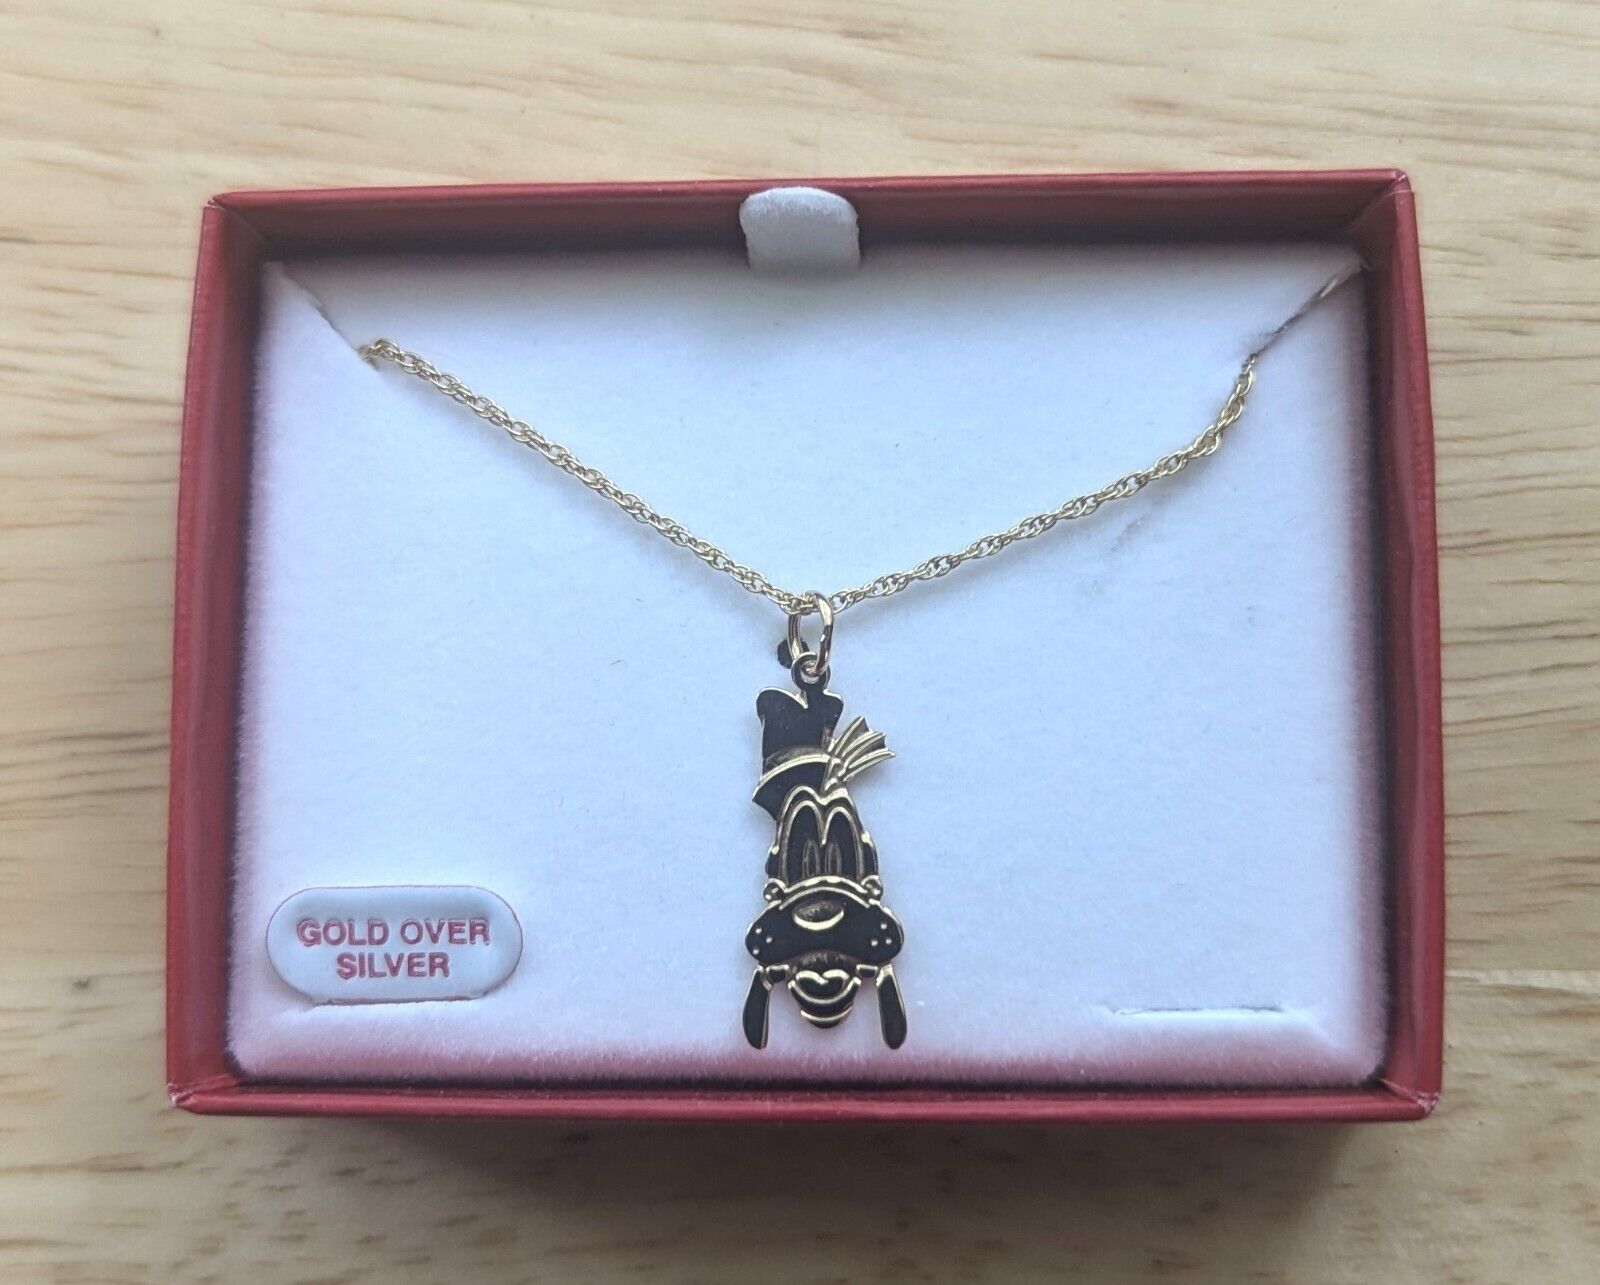 Vintage Disney GOOFY Necklace 13” chain gold over silver NIB